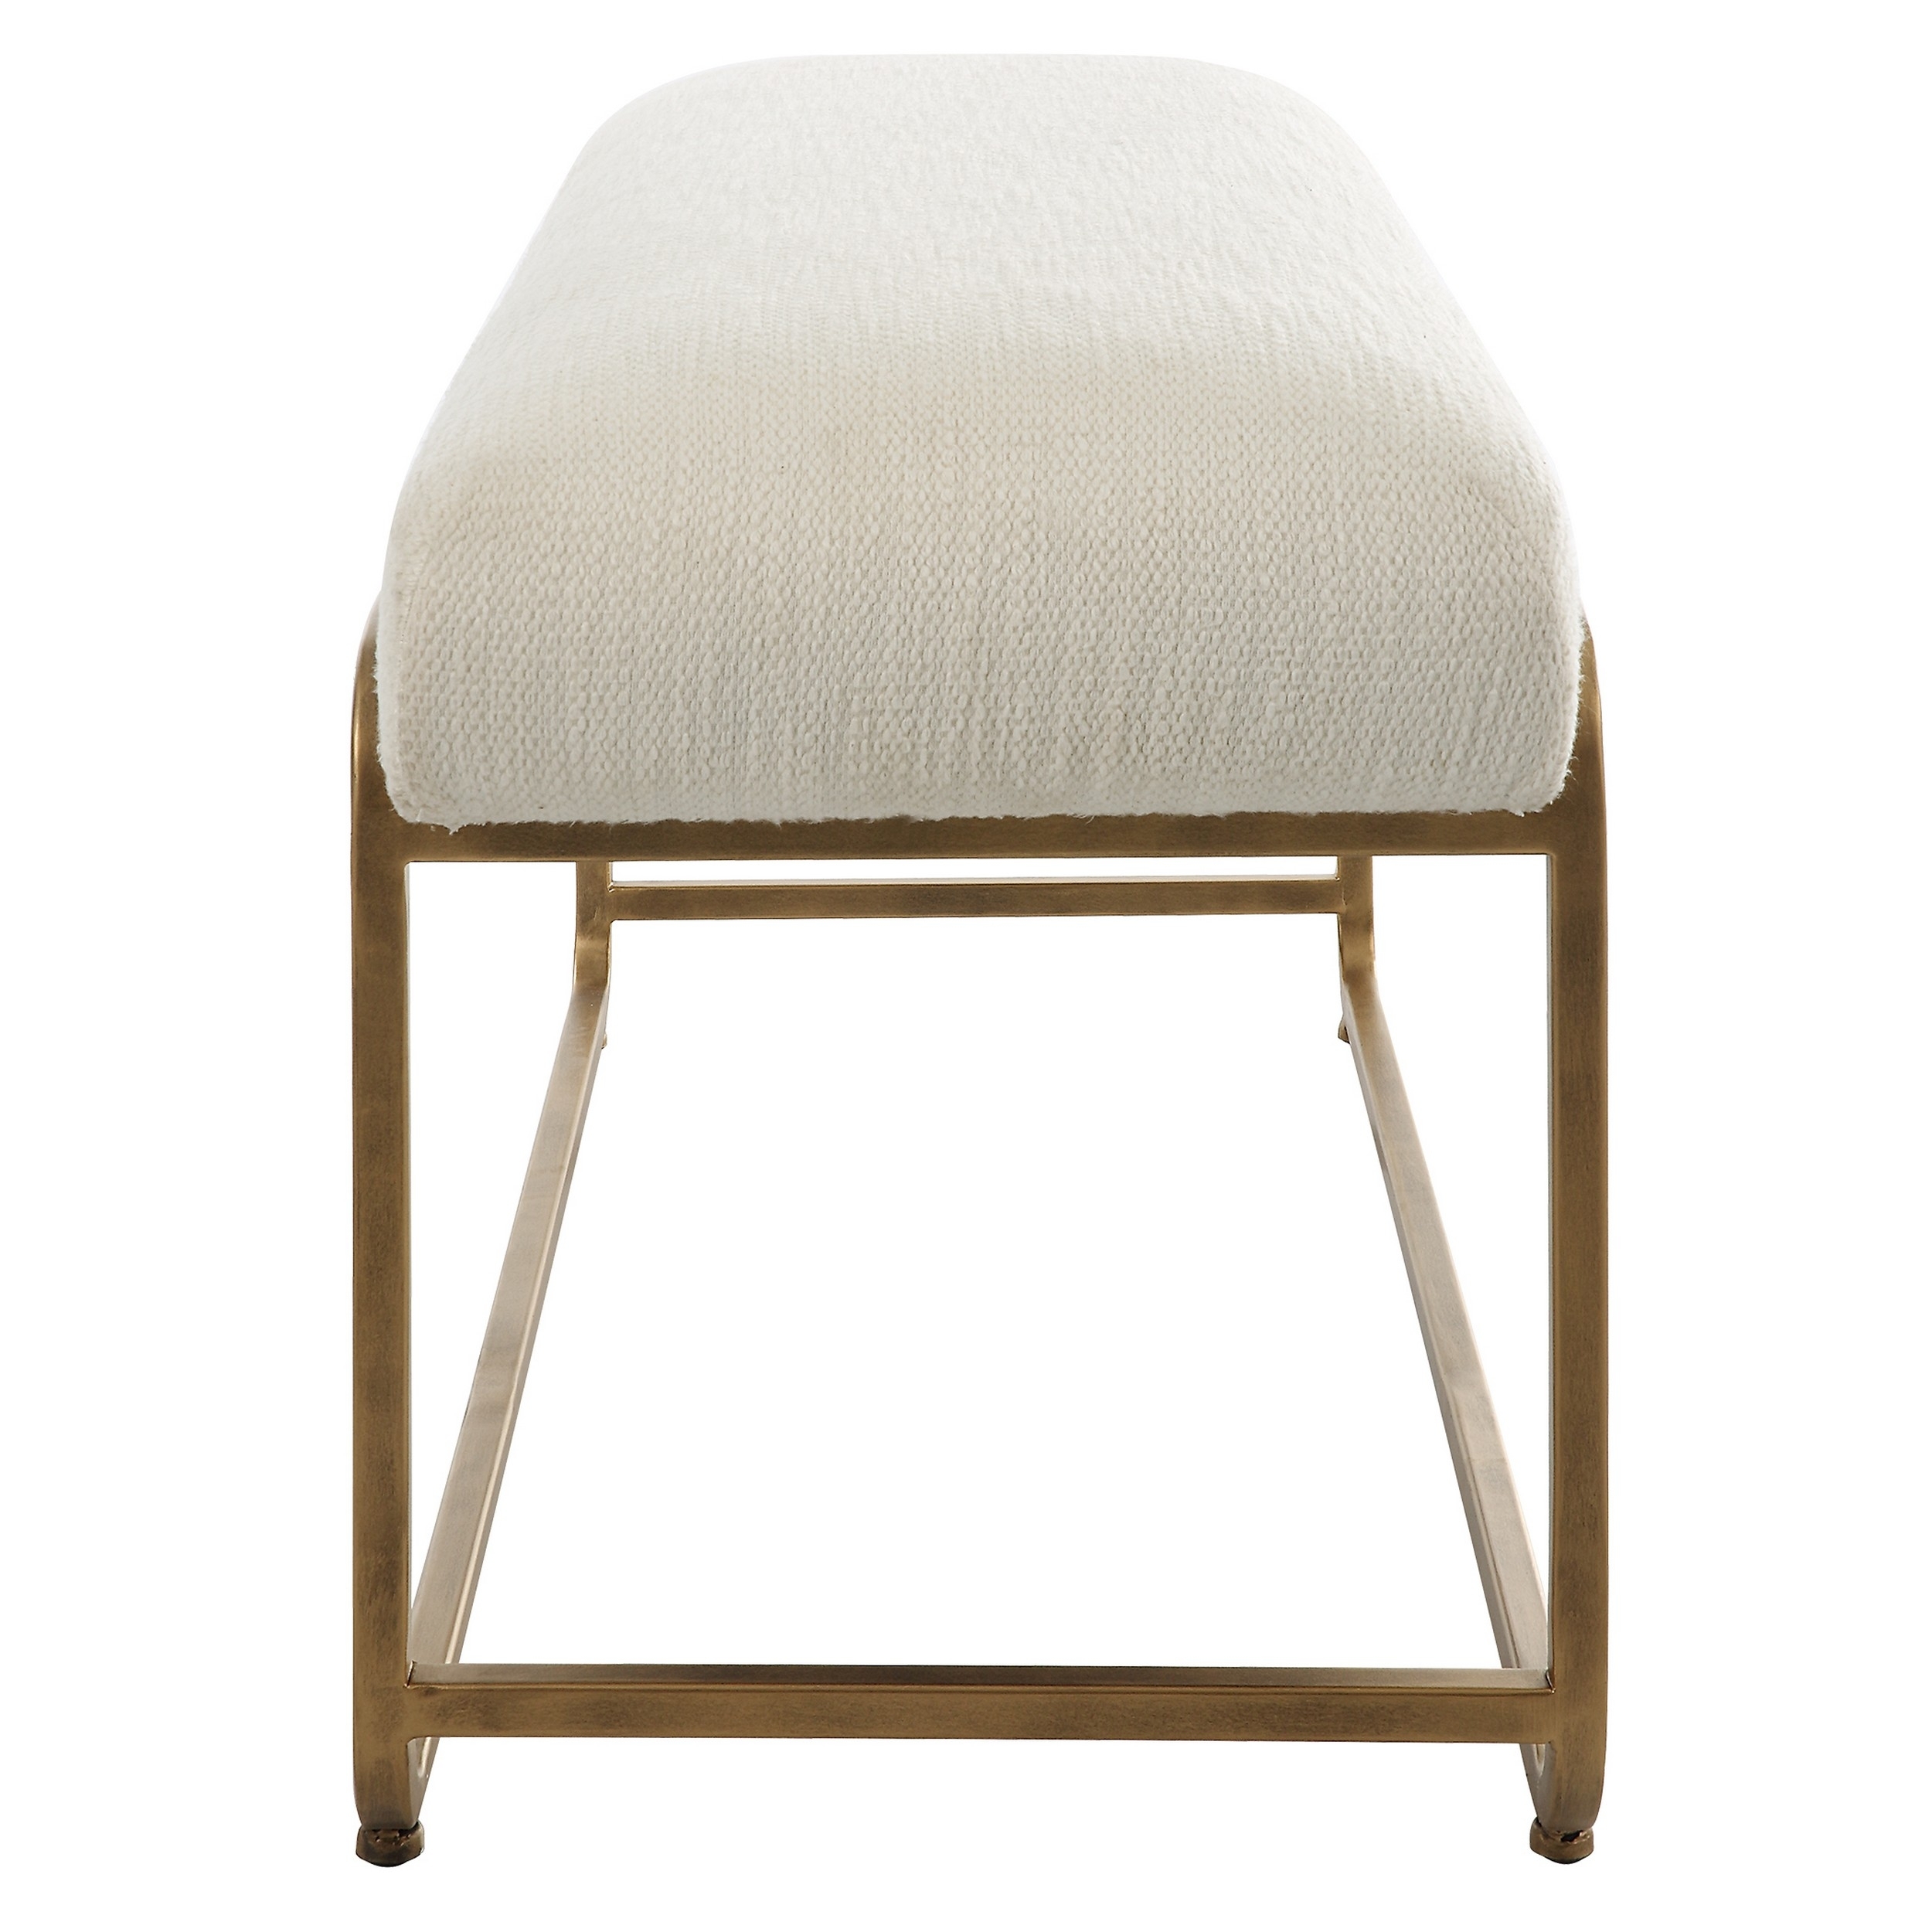 47 Inch Accent Stool, Cushioned, Antique Brushed Brass Frame, Off White -Saltoro Sherpi